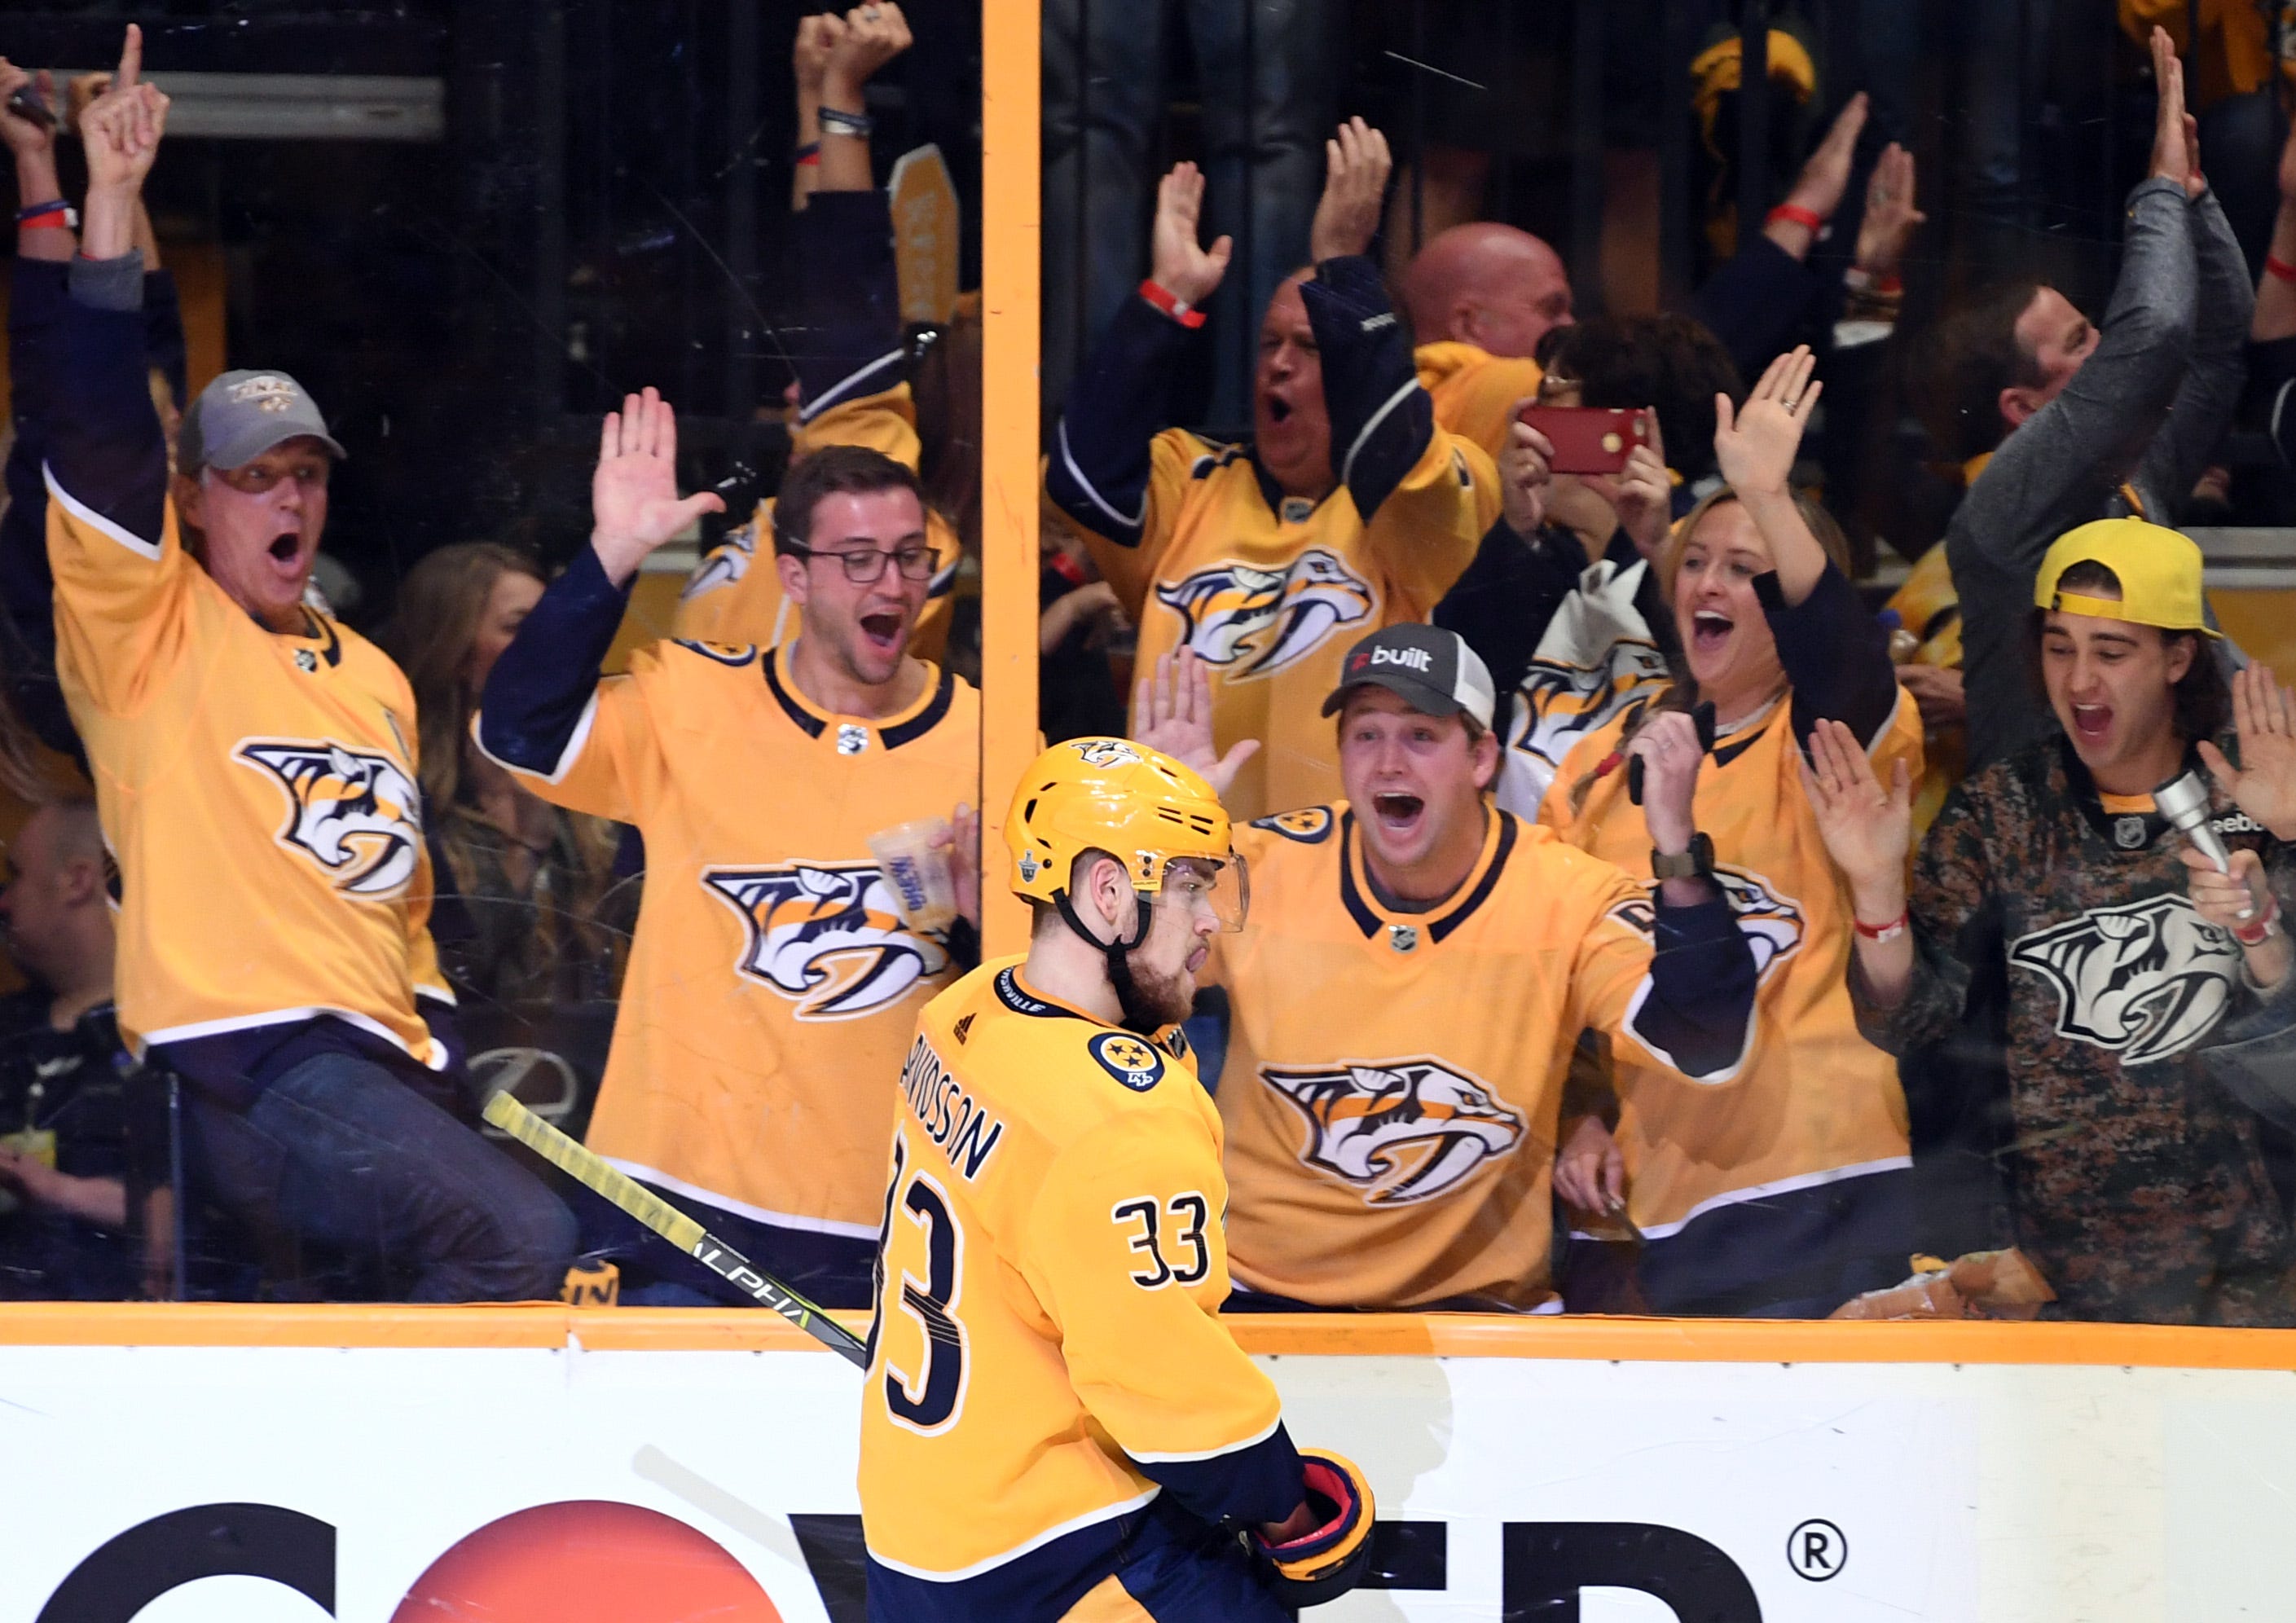 Nashville Predators fans celebrate after a goal by left wing Viktor Arvidsson during the second period  in game two of the second round of the 2018 Stanley Cup Playoffs at Bridgestone Arena.